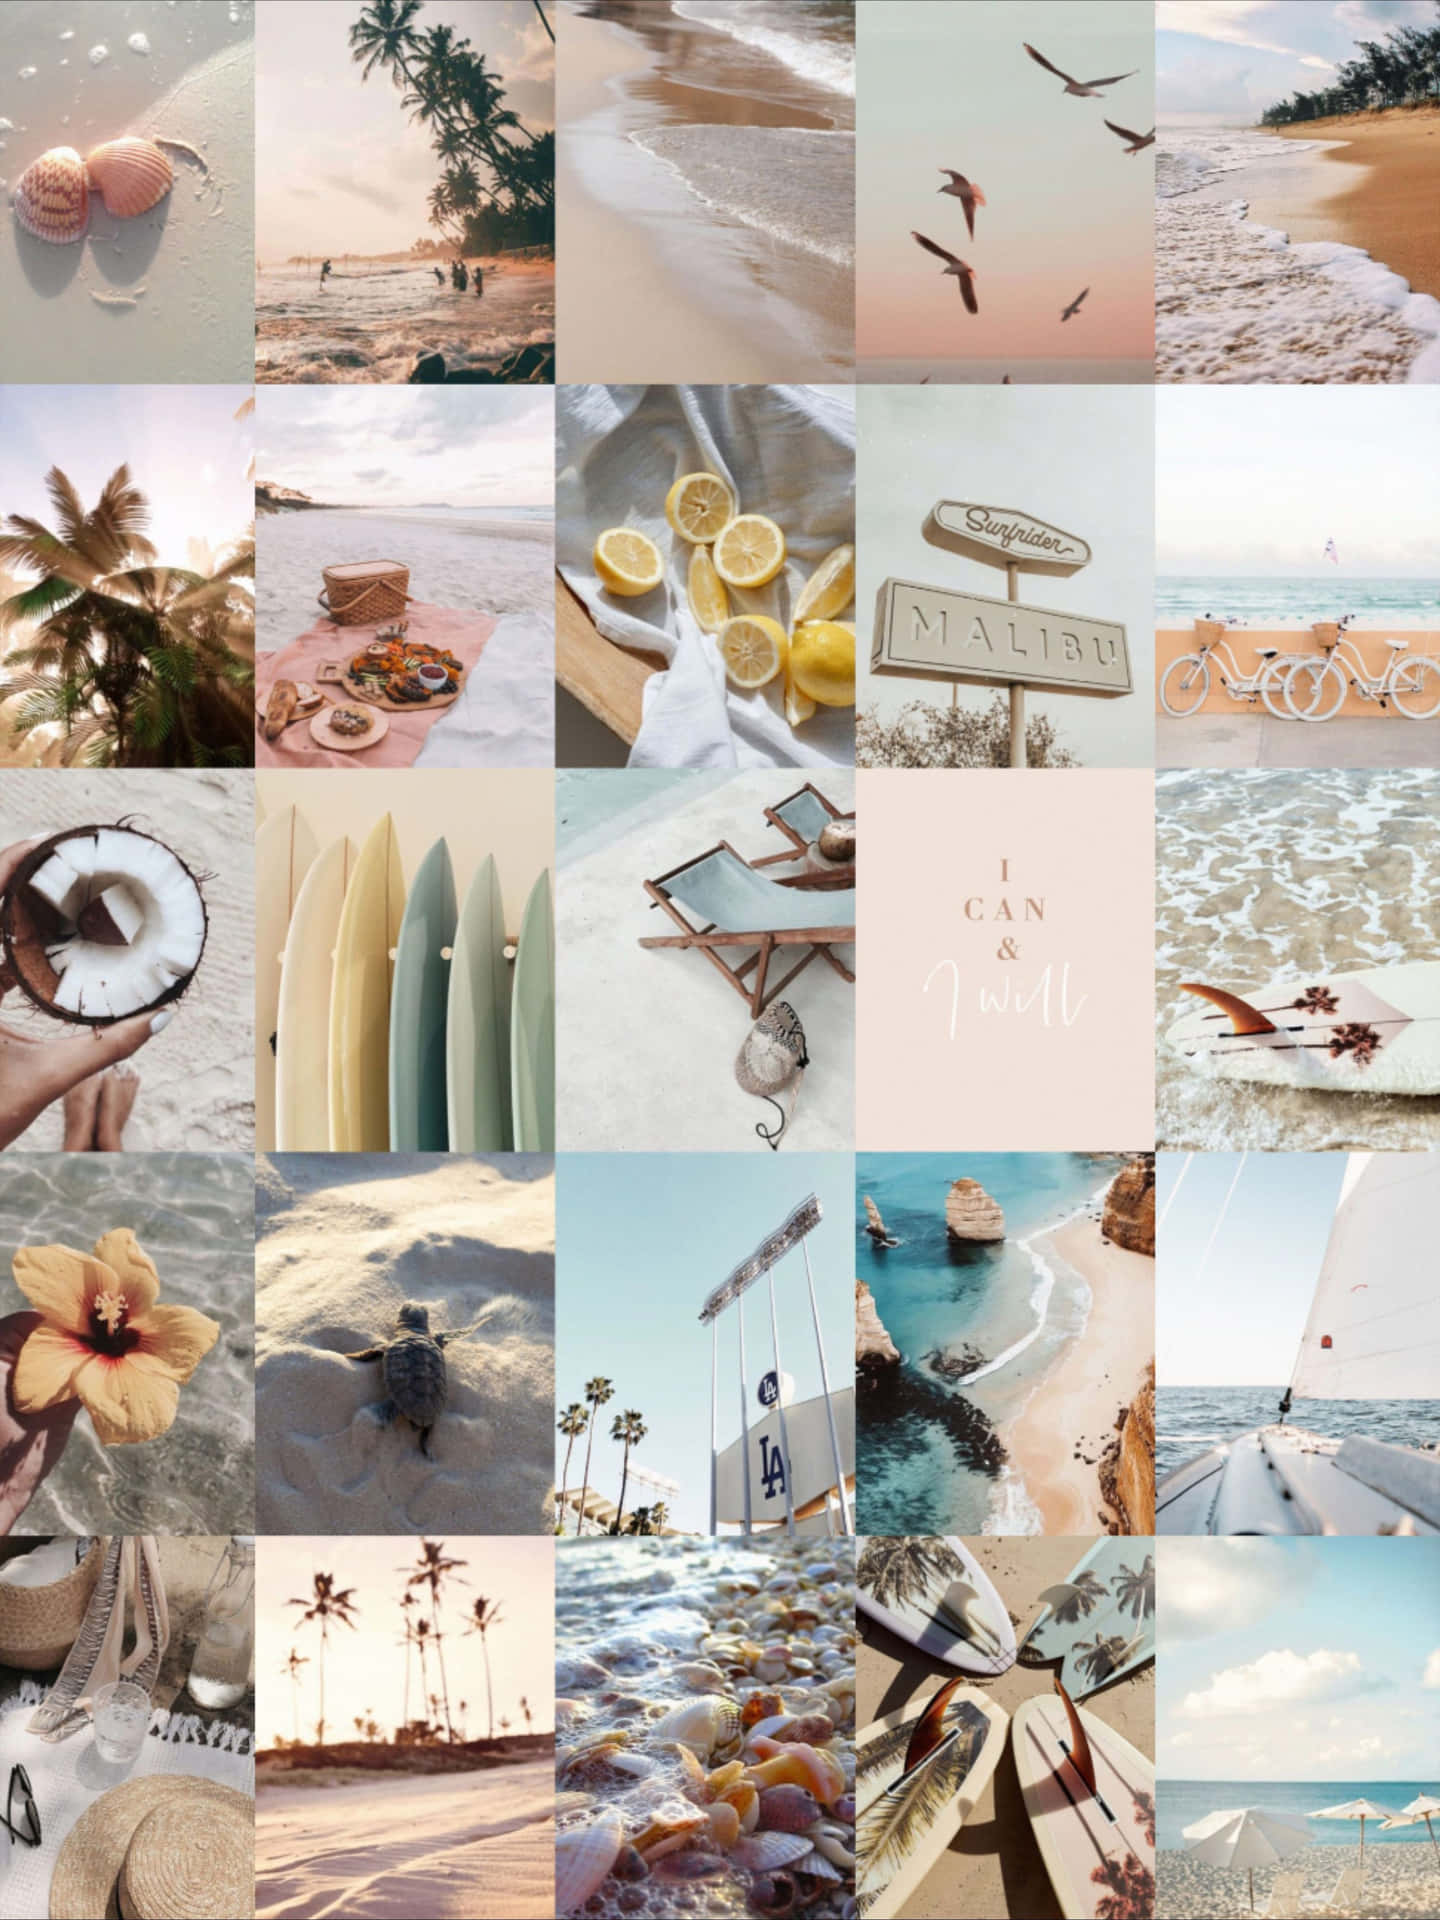 A Collage Of Photos Of Beach And Surfboards